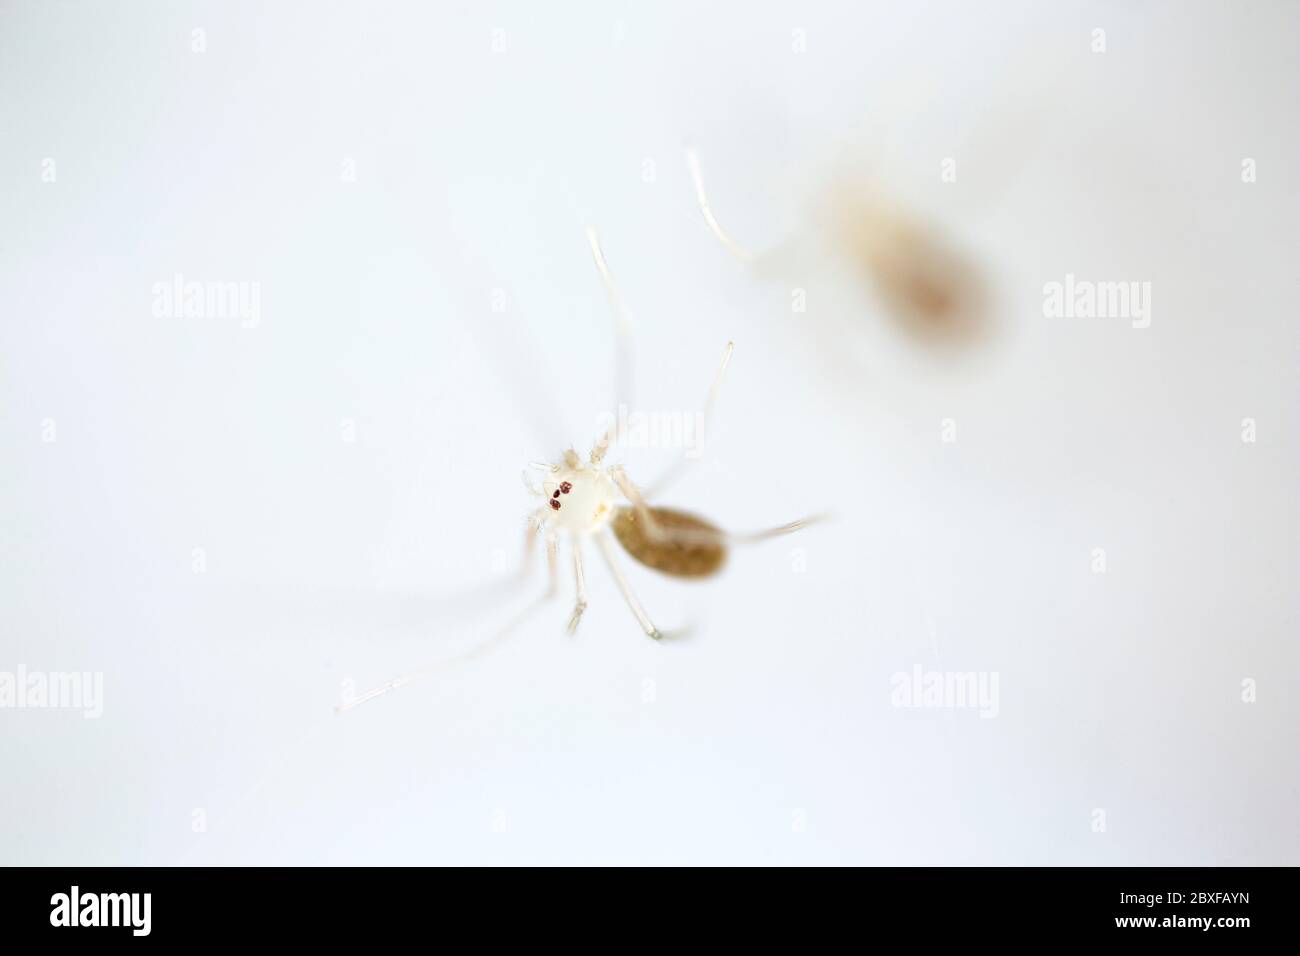 Daddy-long-legs spider - Stock Image - C027/0332 - Science Photo